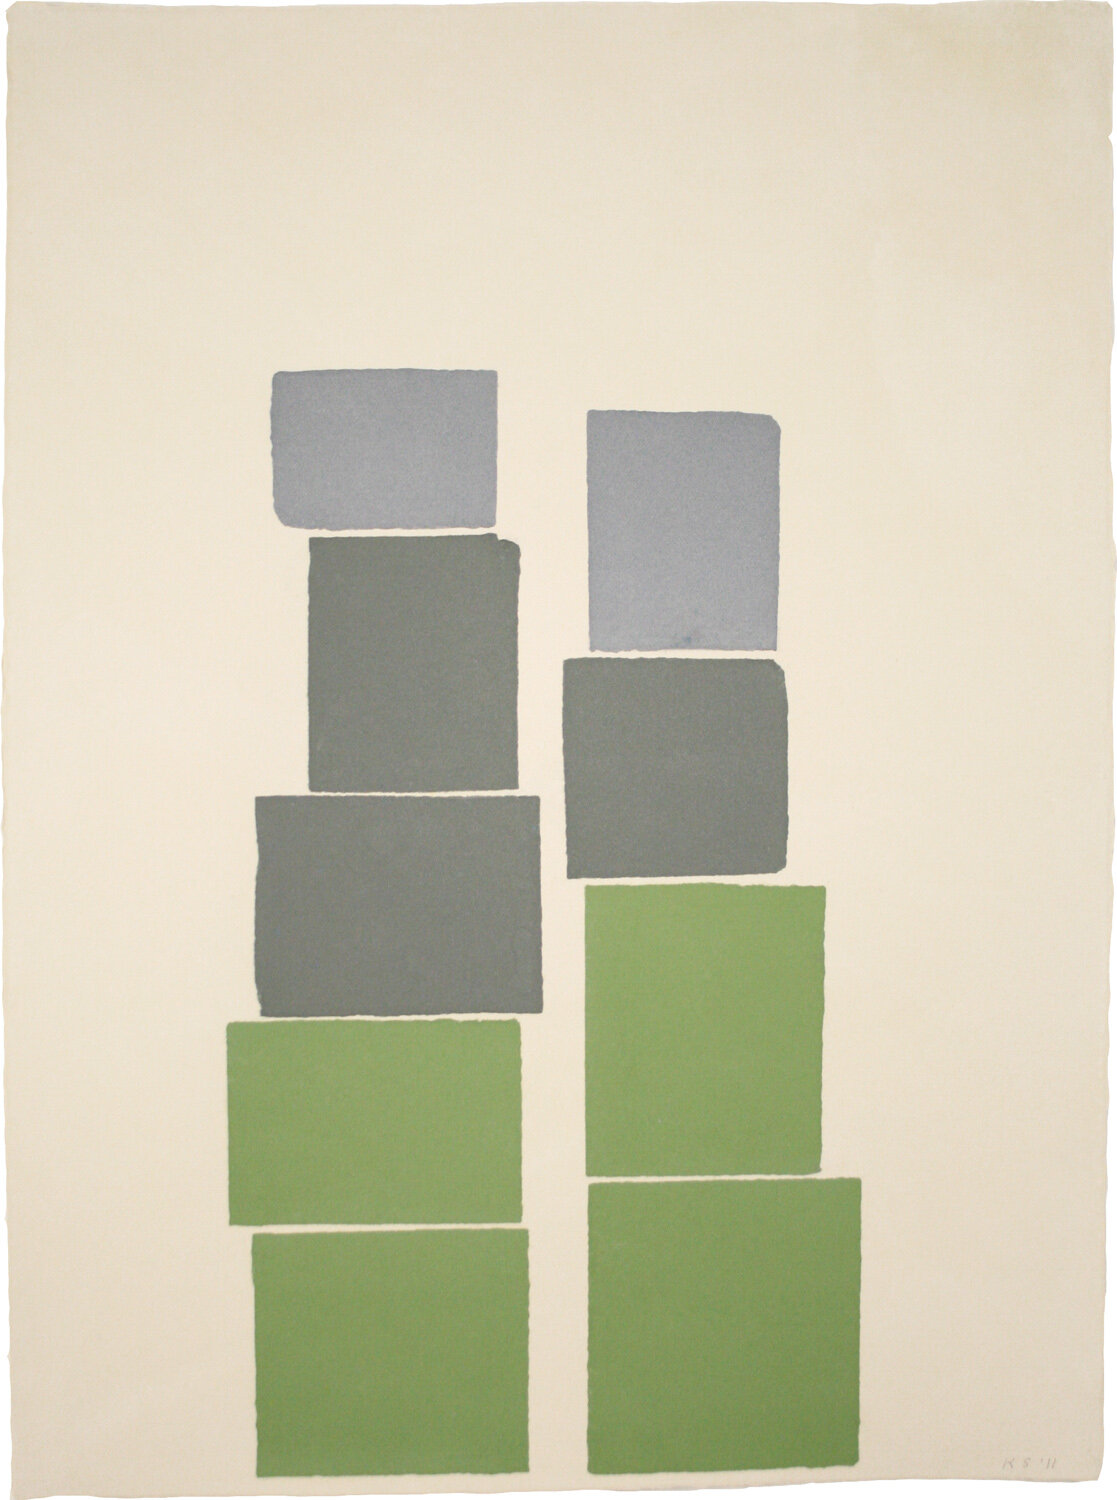  Kate Shepherd,  Lake Louise Stacks,  2011, Pigmented linen blowout on pigmented linen-cotton base sheet, 30.625 x 22.625 inches. 